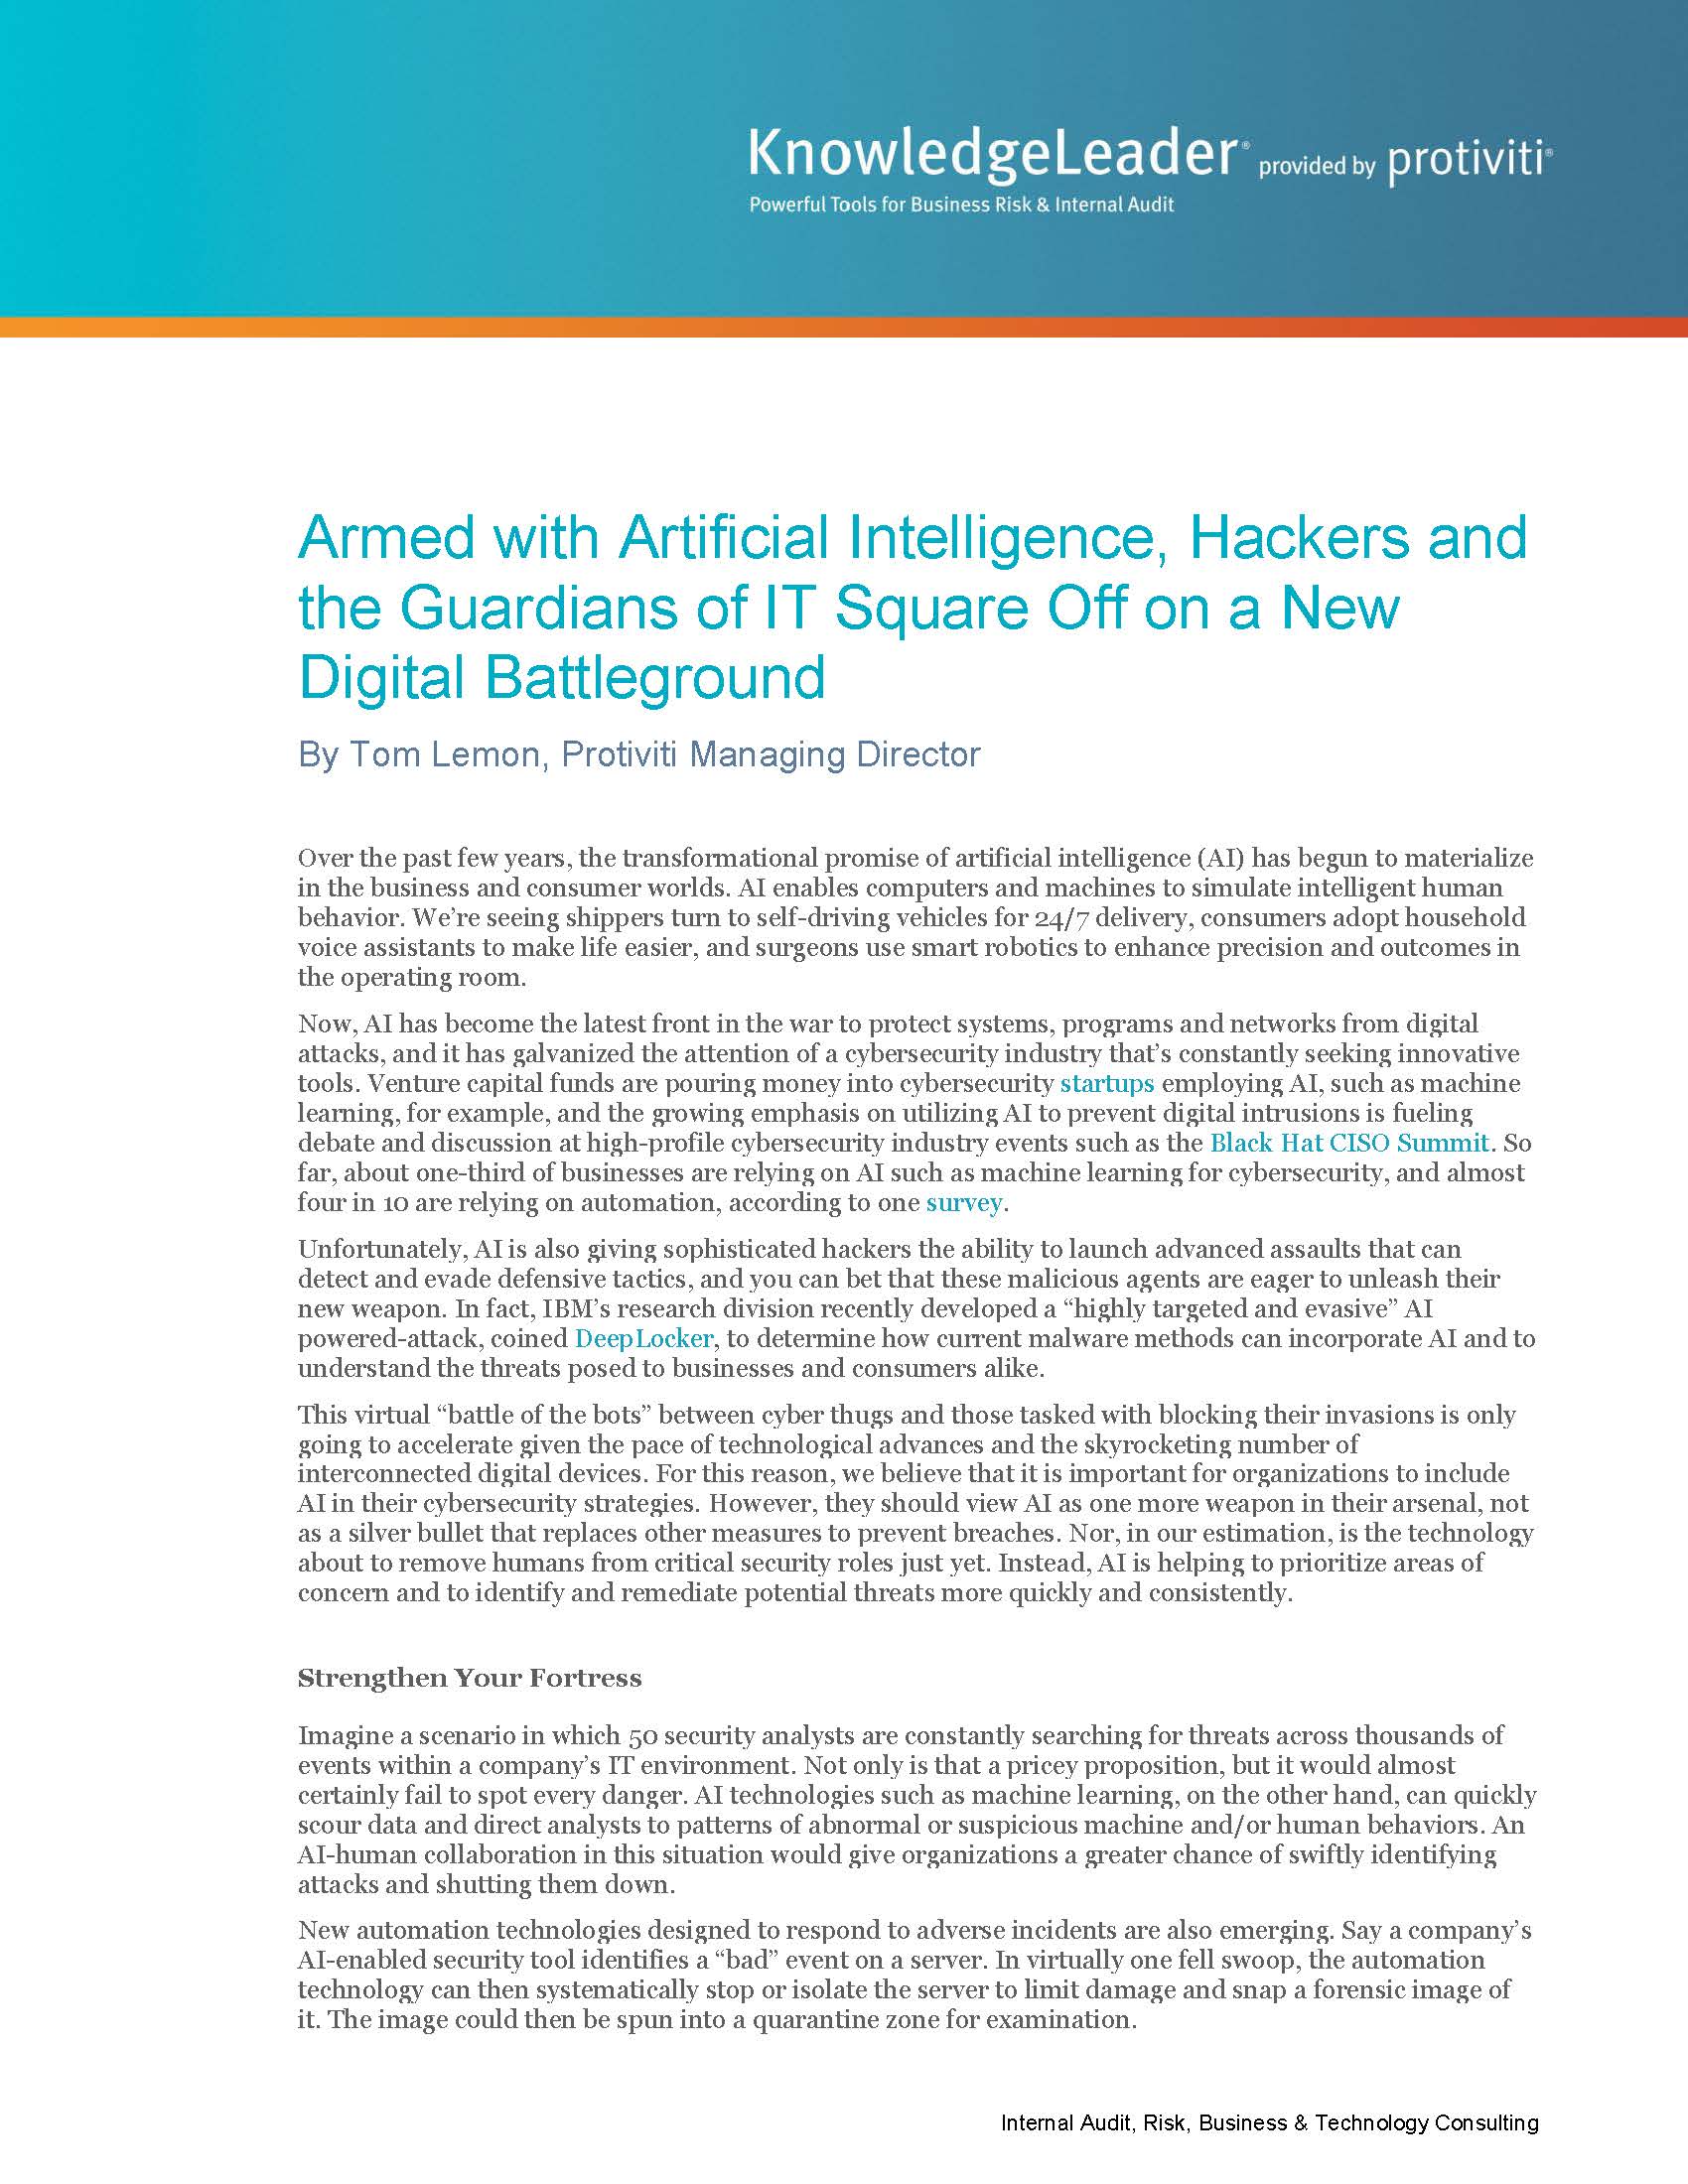 Screenshot of the first page of Armed with Artificial Intelligence, Hackers and the Guardians of IT Square Off on a New Digital Battleground